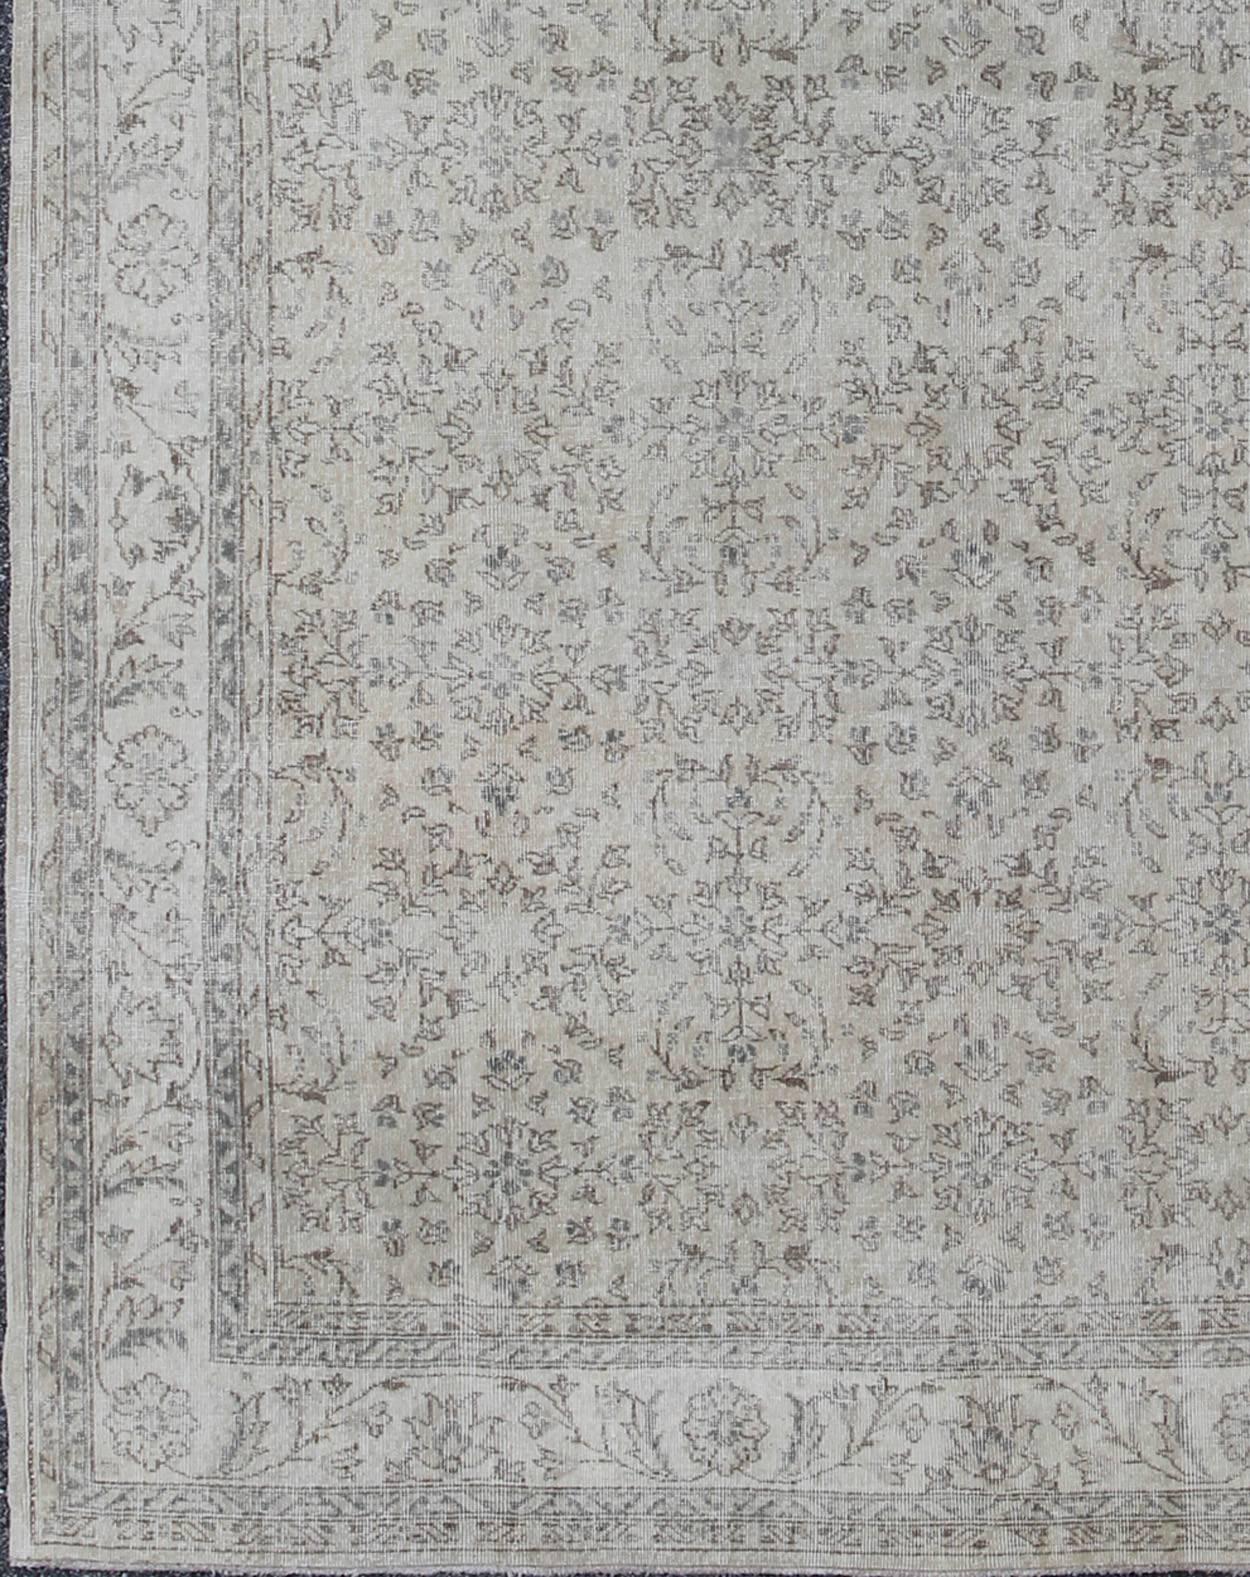 Muted Oushak Turkish Vintage Rug with Beautiful, Intricate Floral Design, rug en-140556, country of origin / type: Turkey / Oushak, circa 1940

The design of this beautiful vintage Oushak rug from mid-20th century Turkey is enhanced by its lustrous